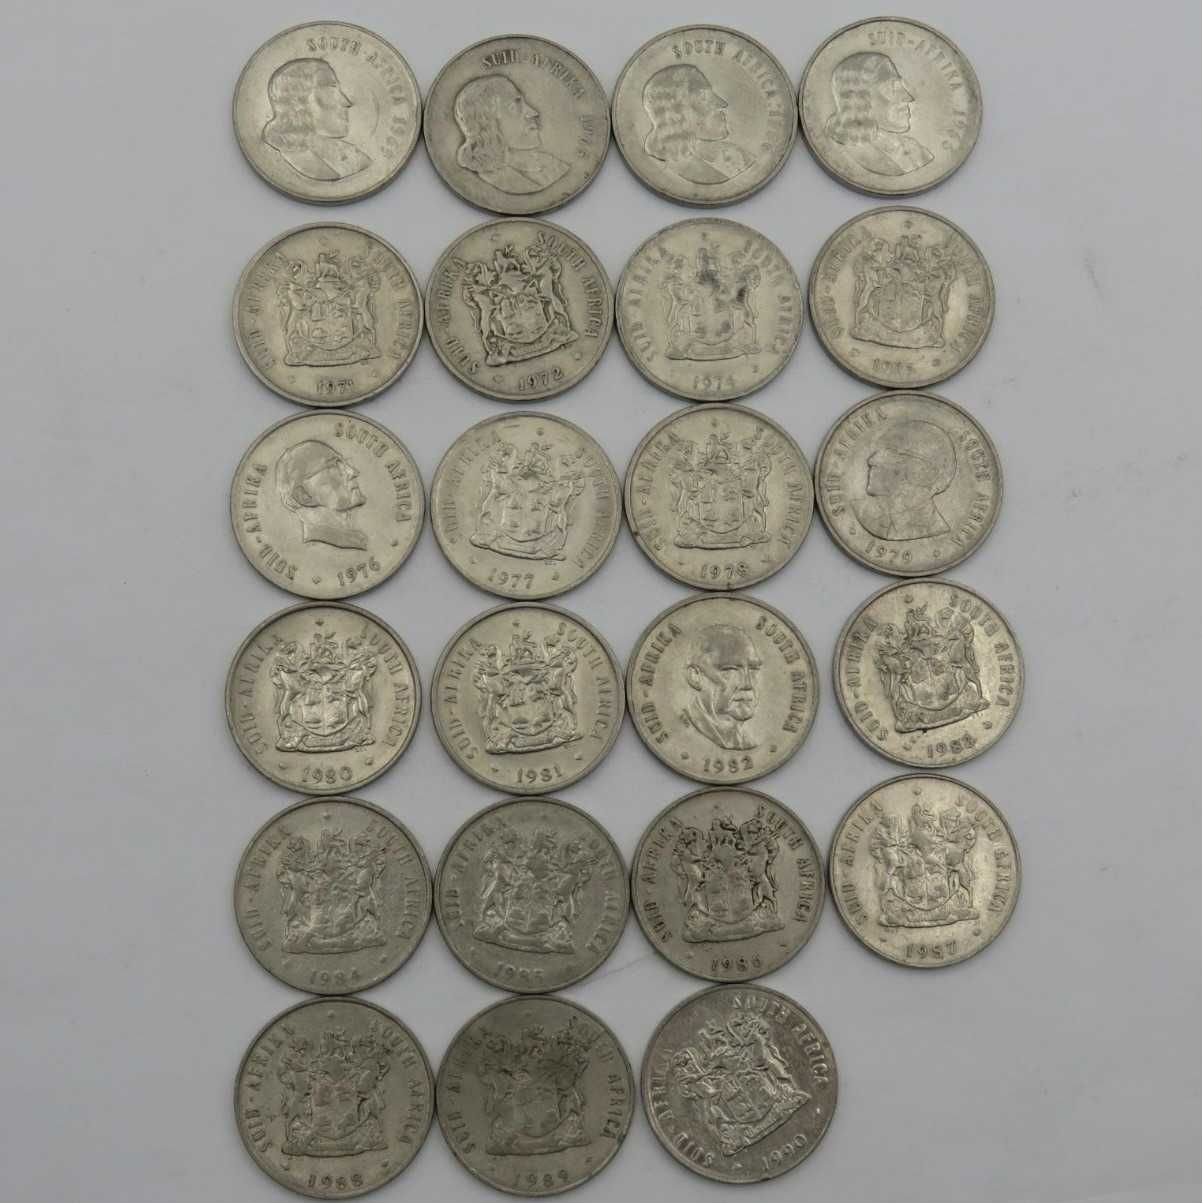 Lot of 23 South African 20 Cent coins between 1965 and 1990